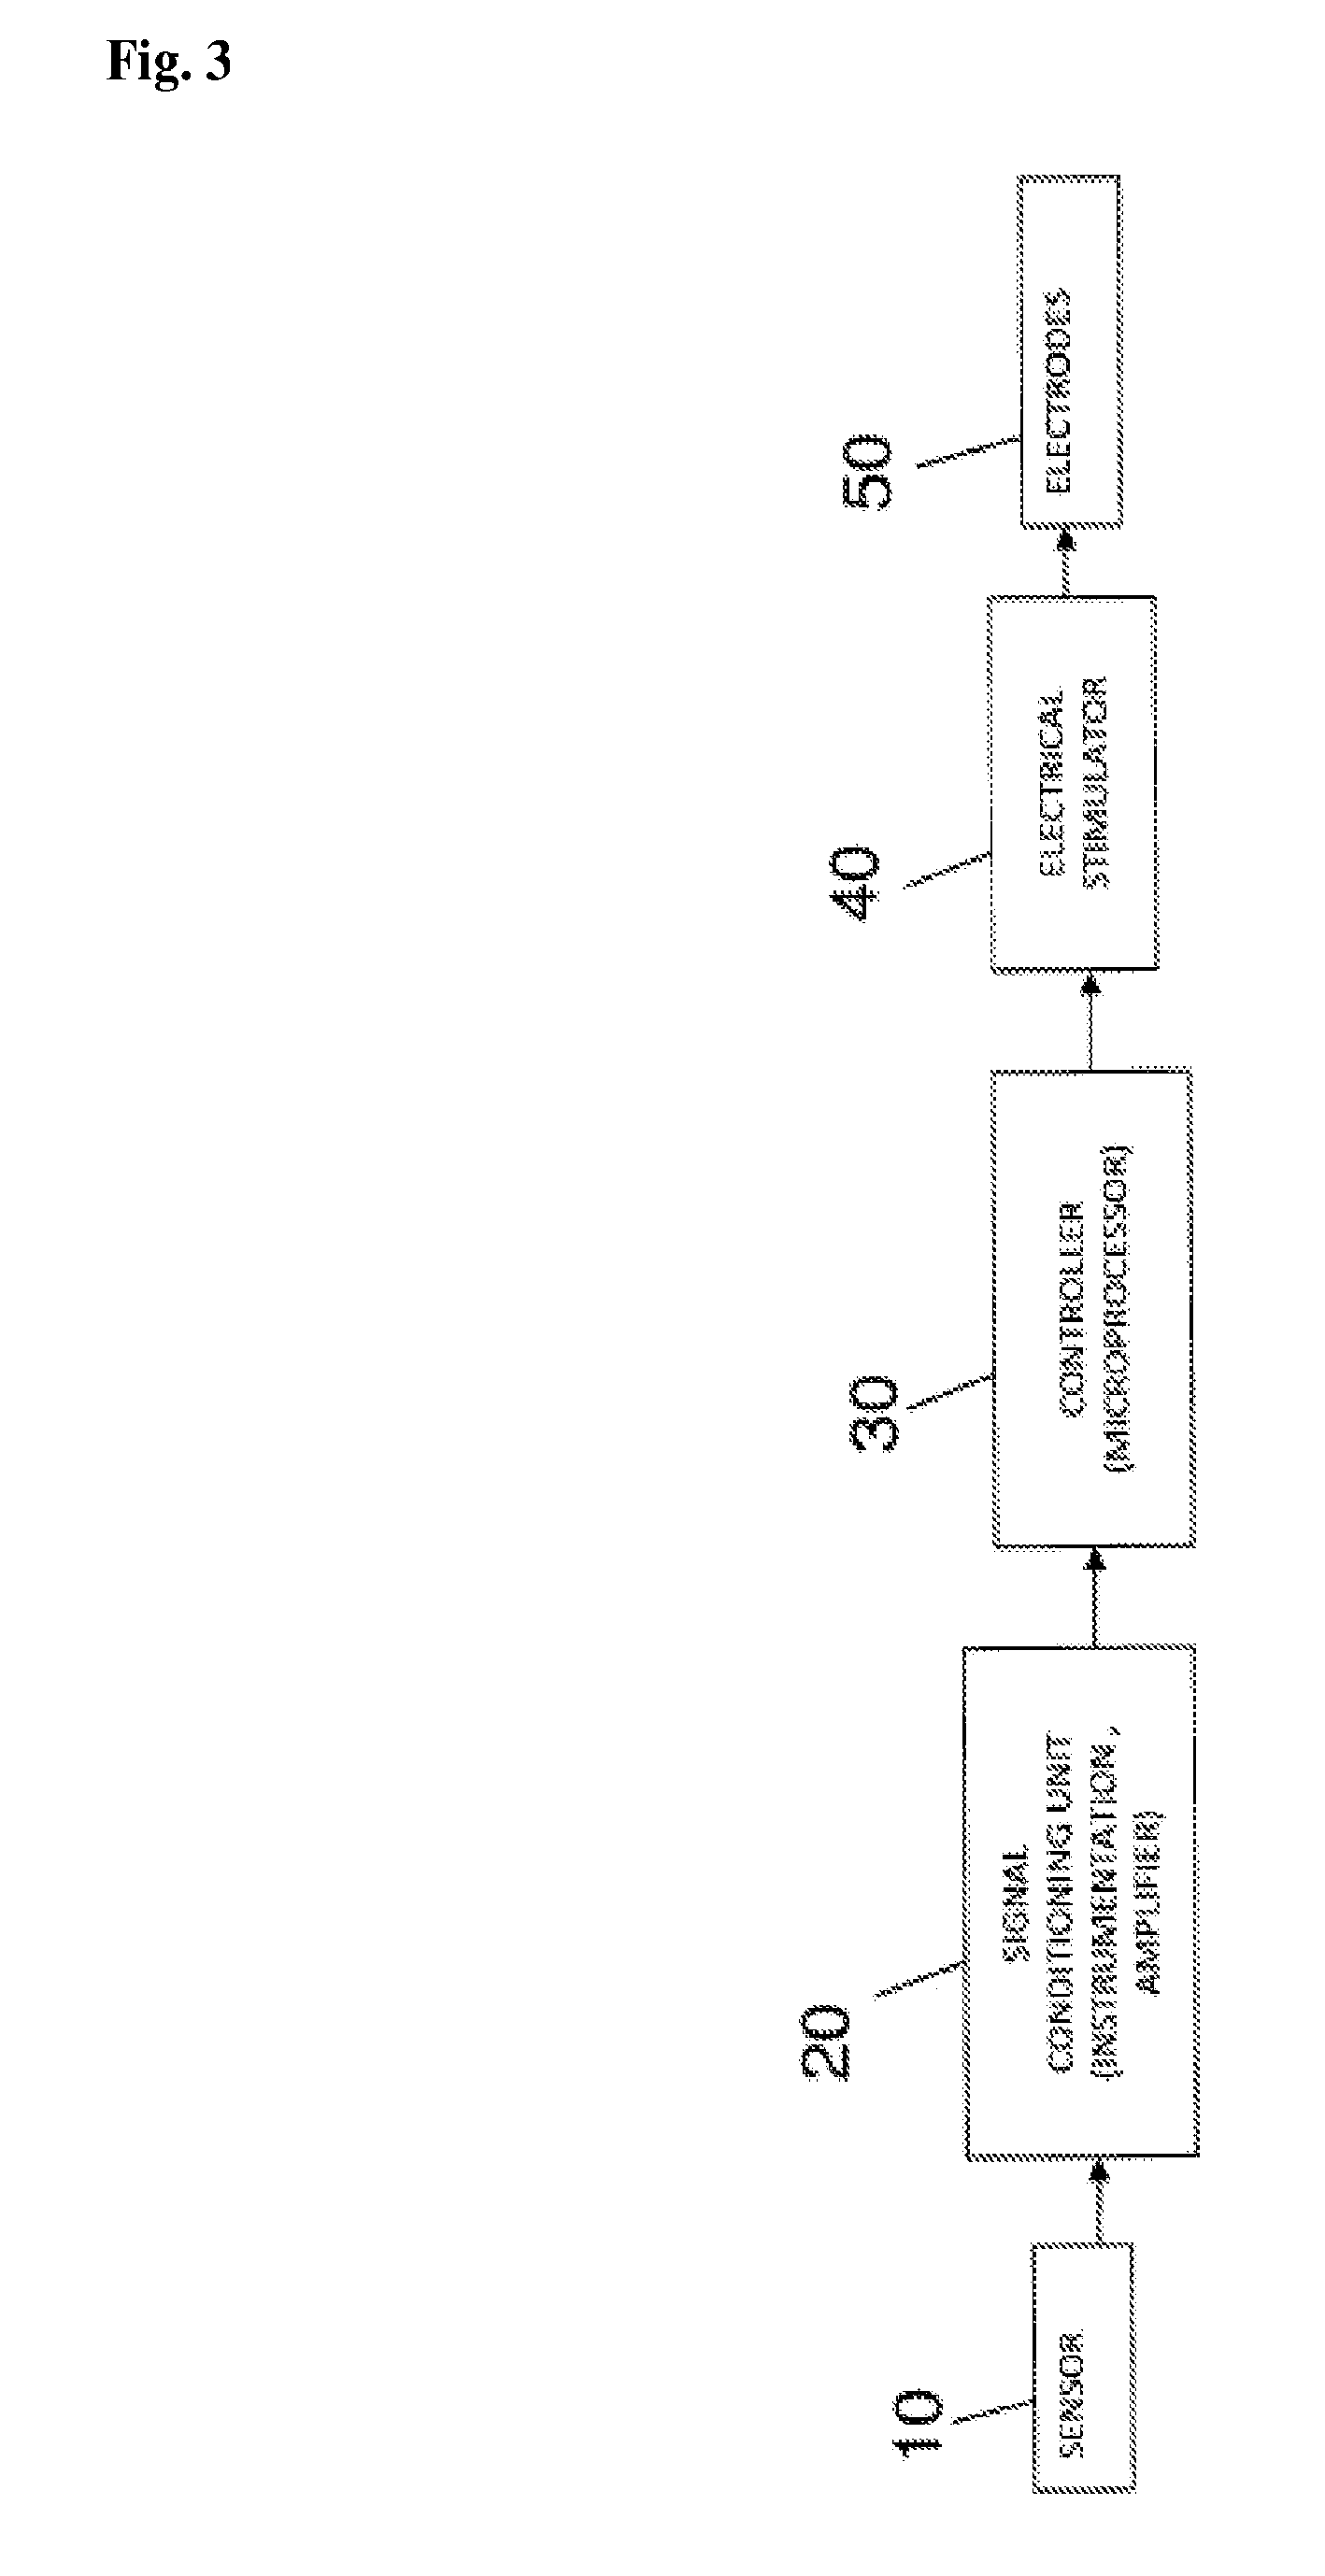 Apparatus and methods for assisting breathing